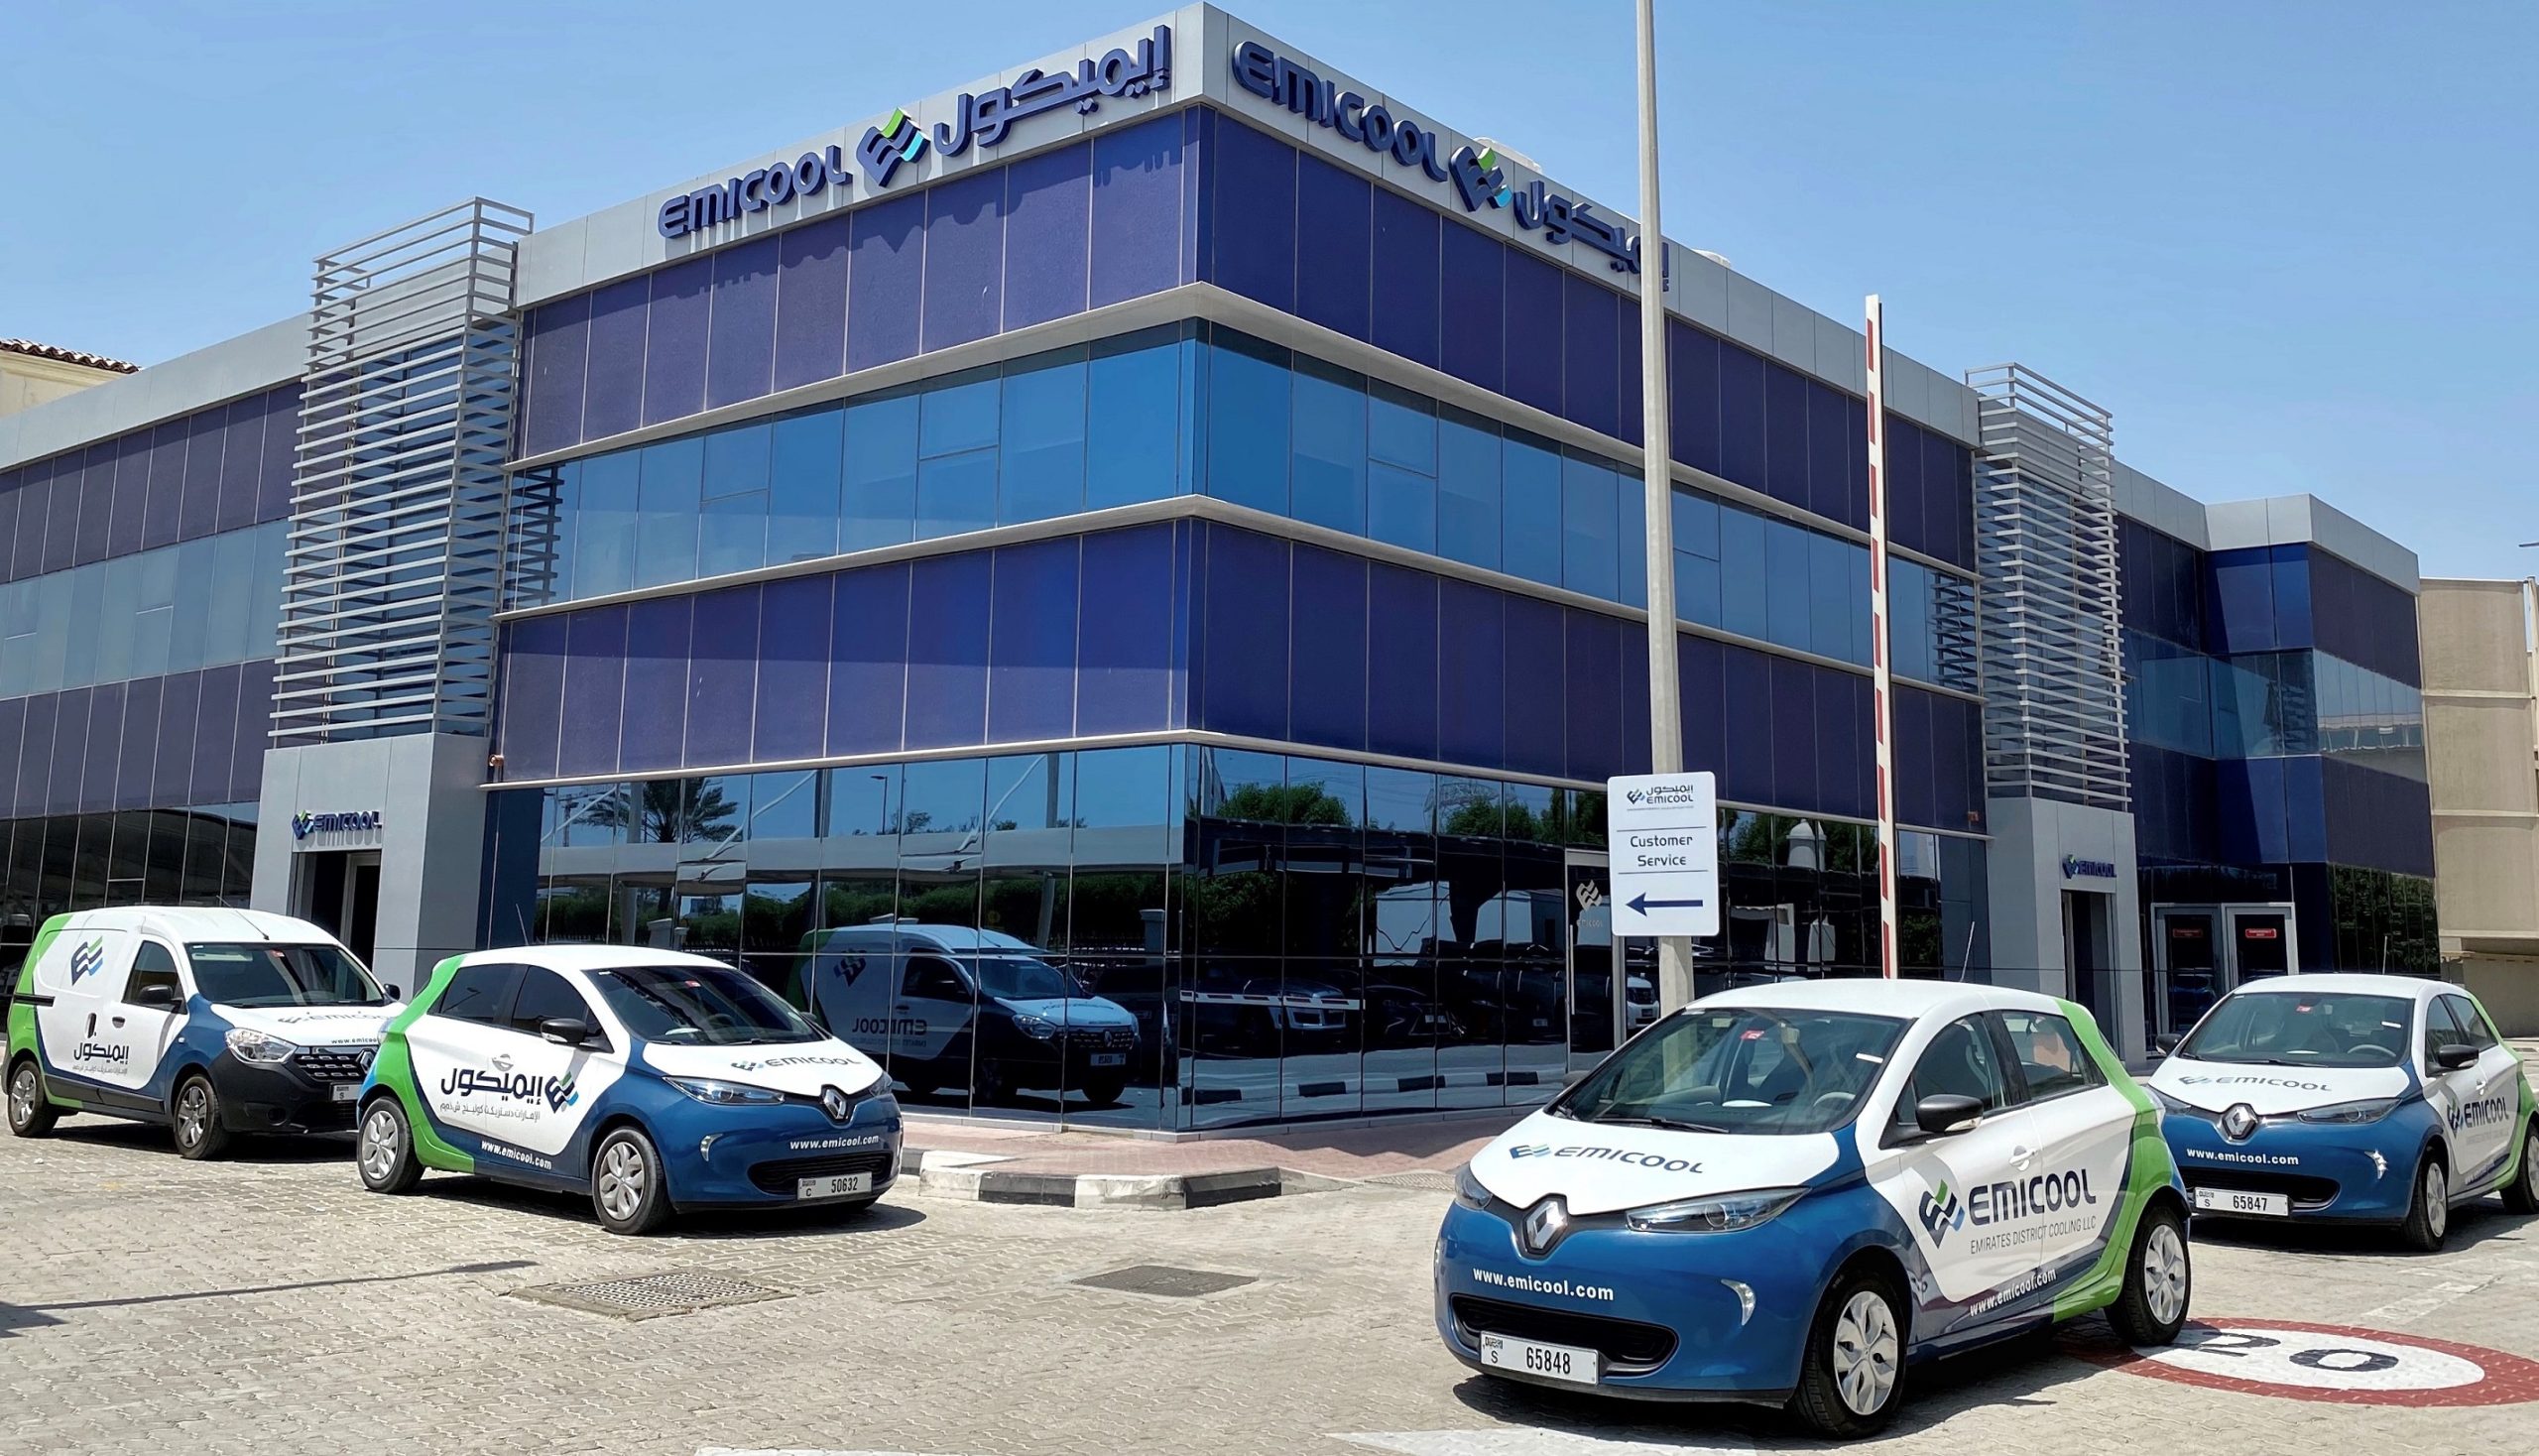 Image for Emicool’s Electric Vehicle Fleet Operation Marks A Year, Drops CO2 Emissions By 135.5 Tons, Maintenance Costs By 48%